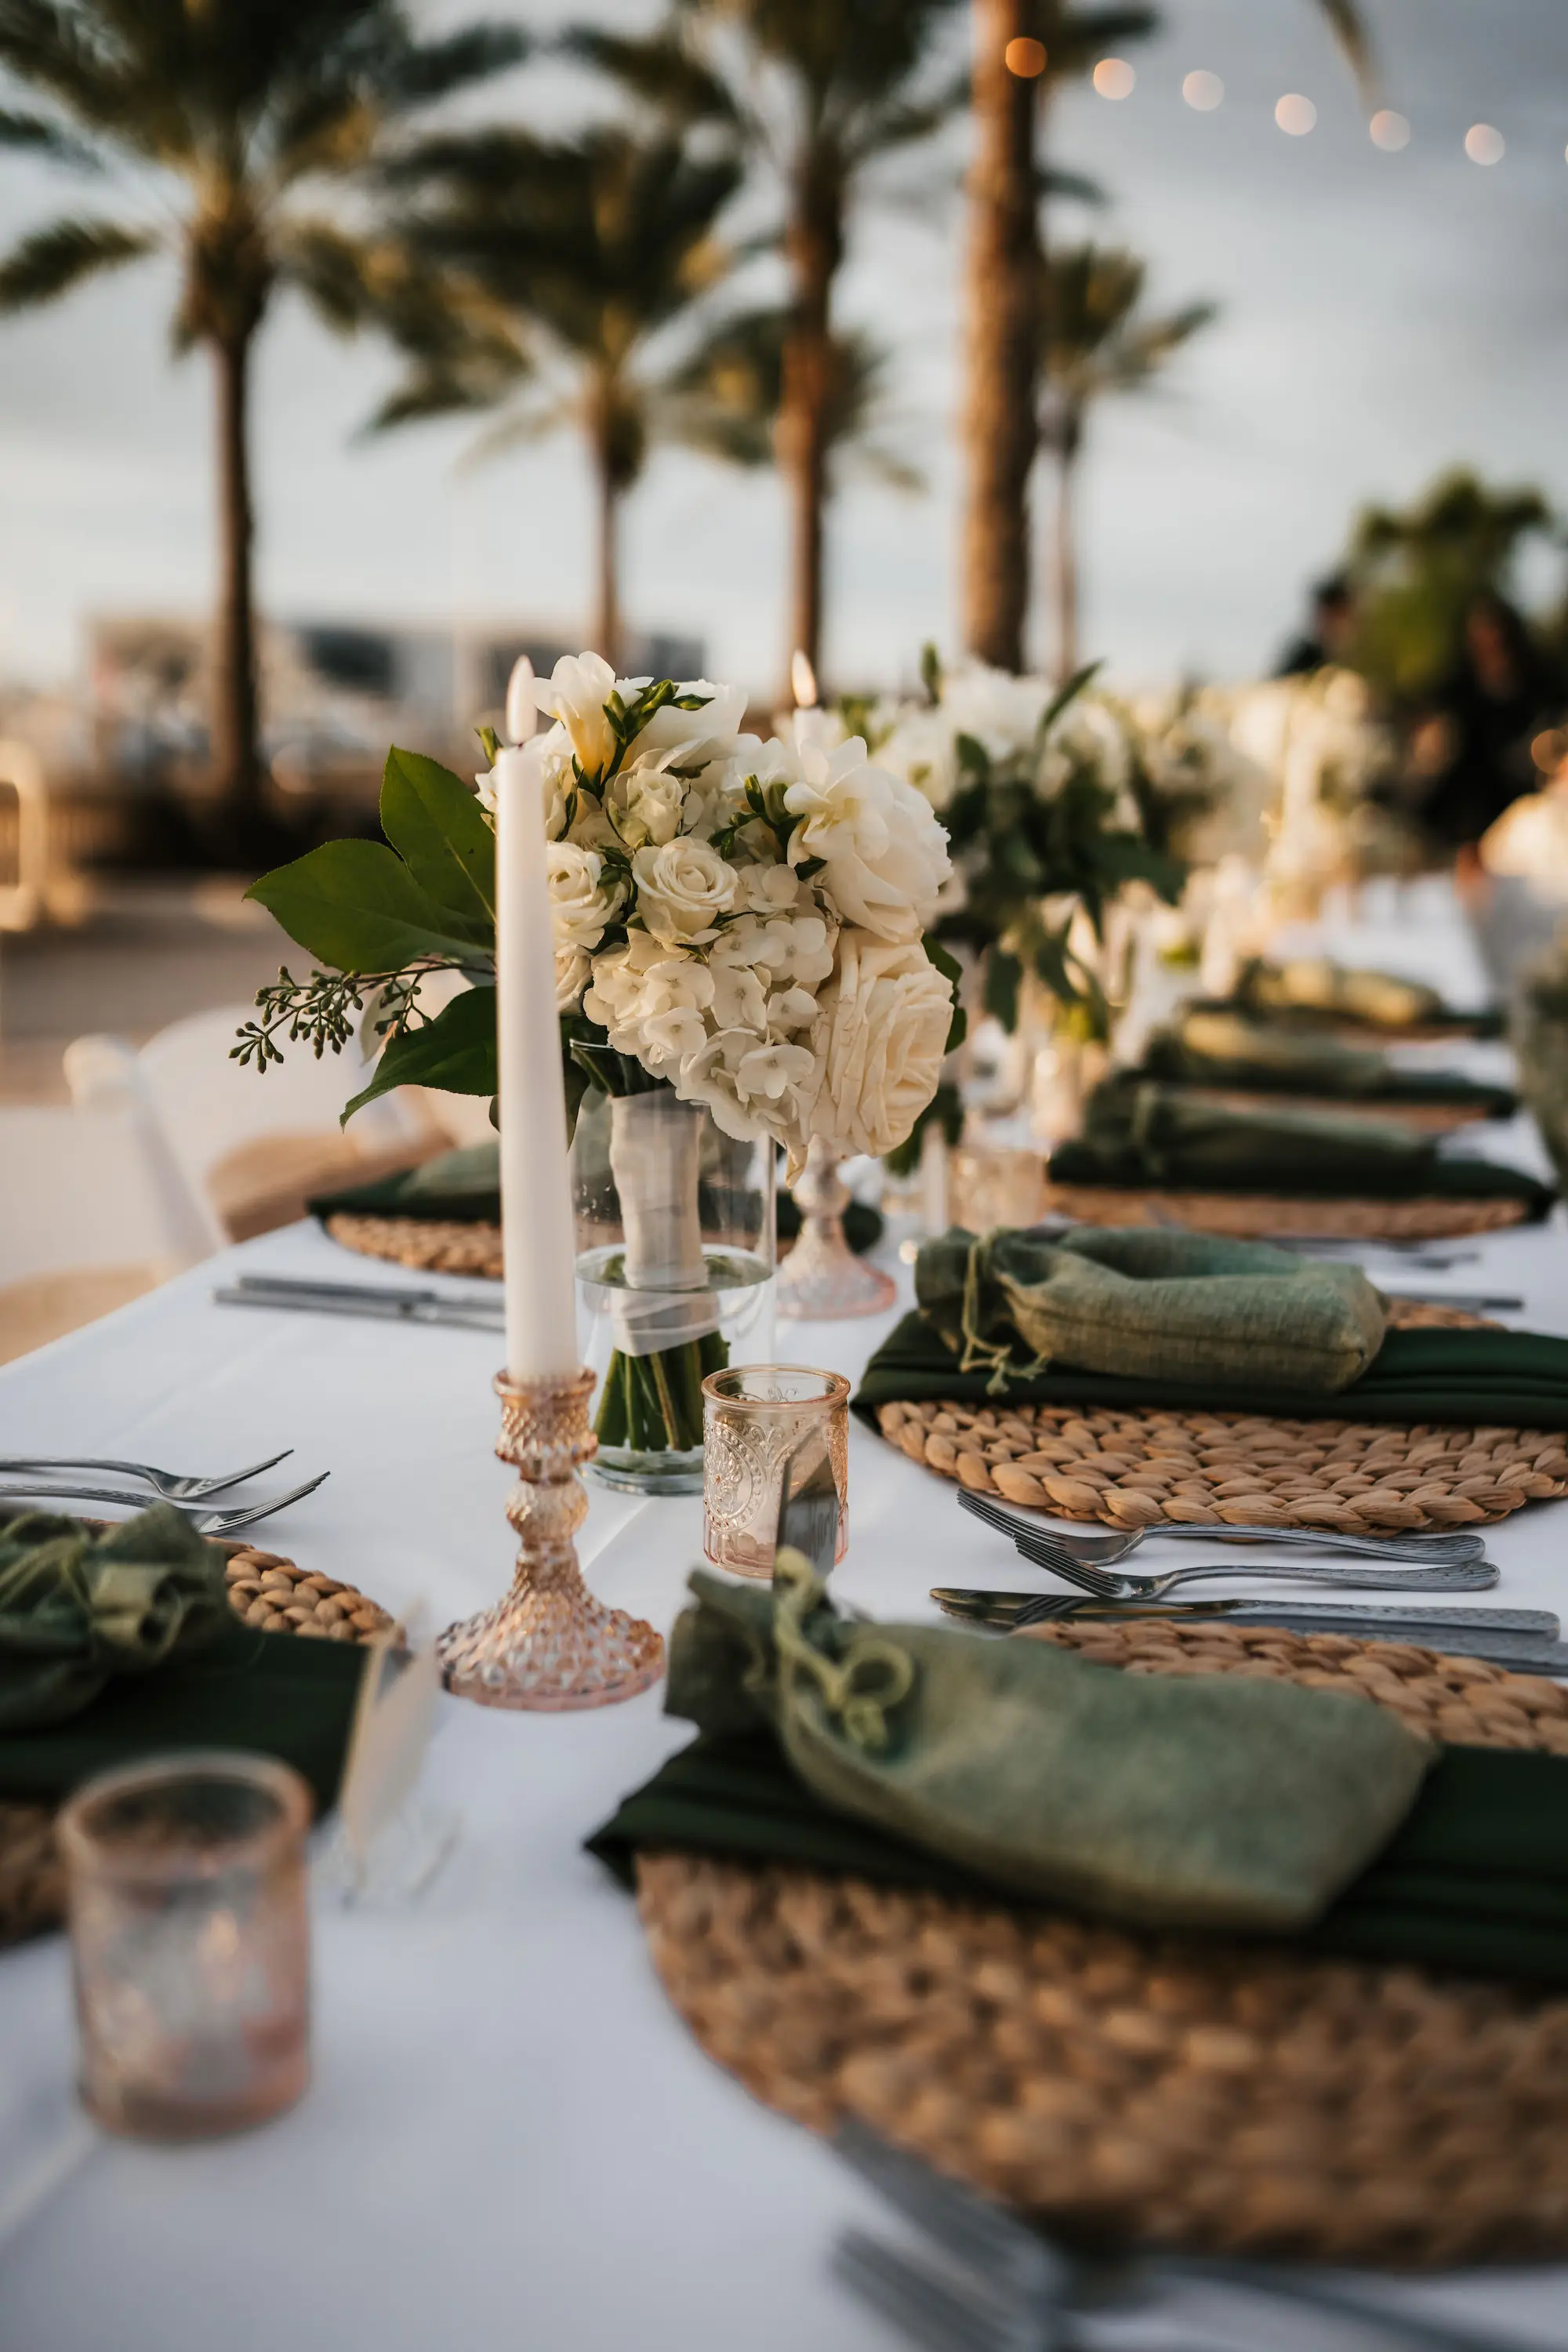 Timeless Outdoor Wedding Reception Place Setting Decor Inspiration | Flameless Candles, White Roses, and Hydrangeas Centerpiece Ideas | Hyacinth Placemat, Black Linen Napkins, and Green Guest Gift Ideas